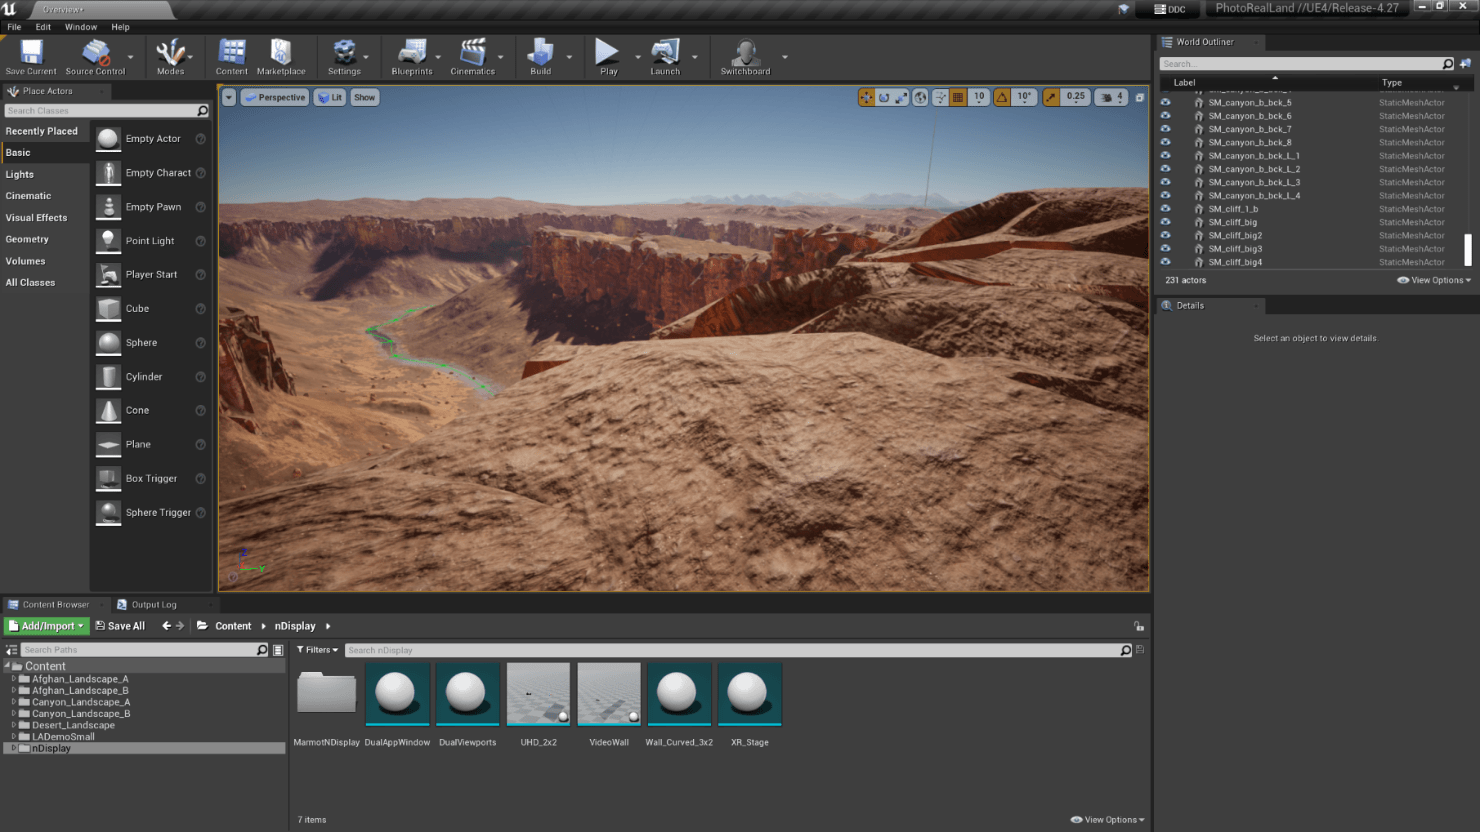 Editing Blend Spaces  Unreal Engine 4.27 Documentation